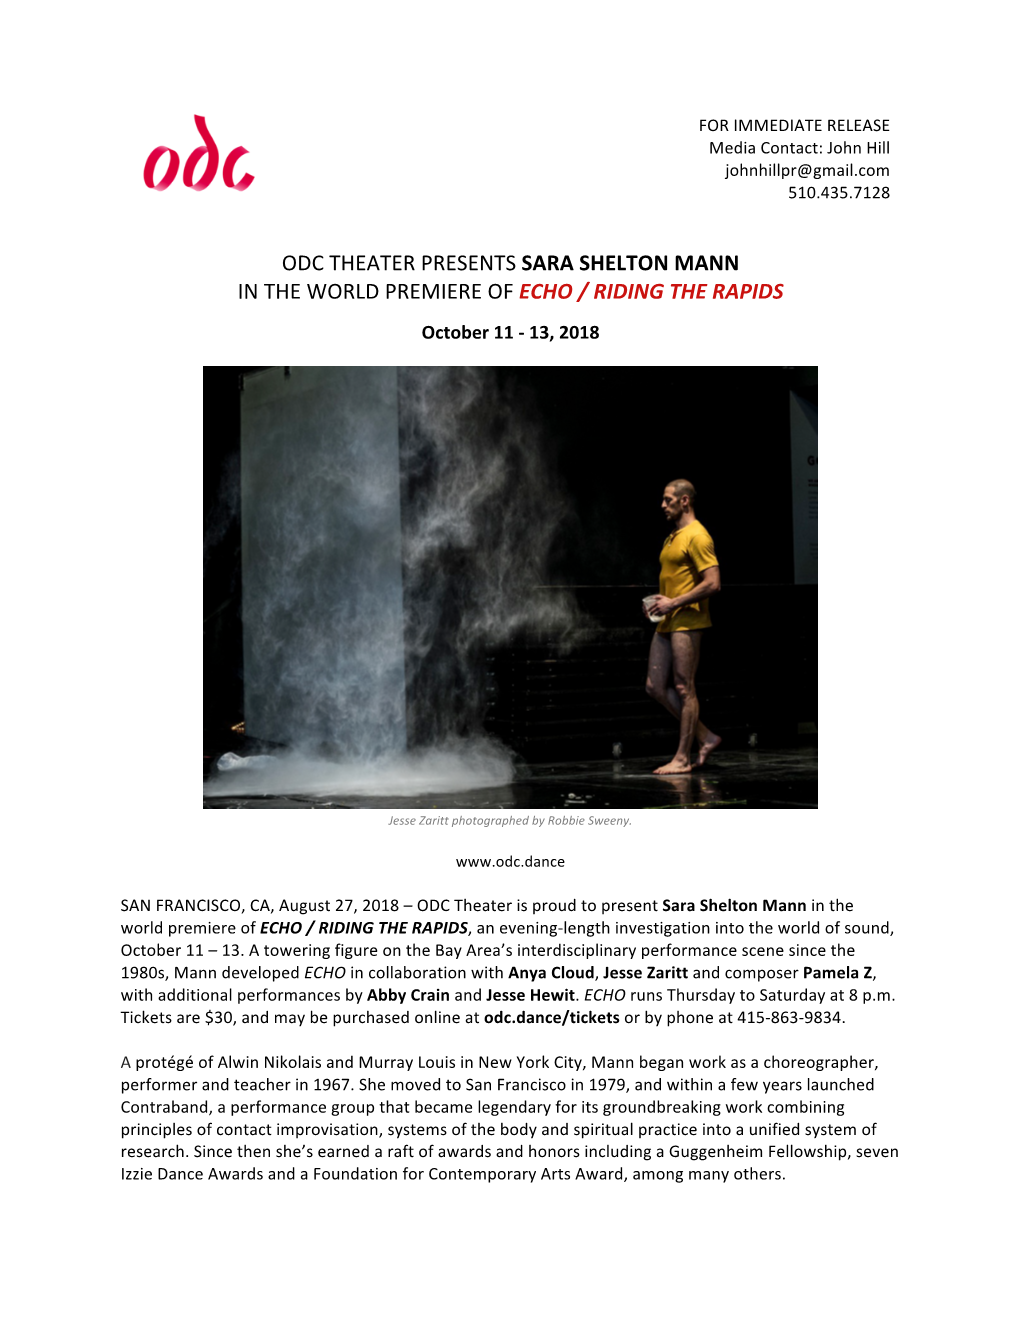 Odc Theater Presents Sara Shelton Mann in the World Premiere of Echo / Riding the Rapids